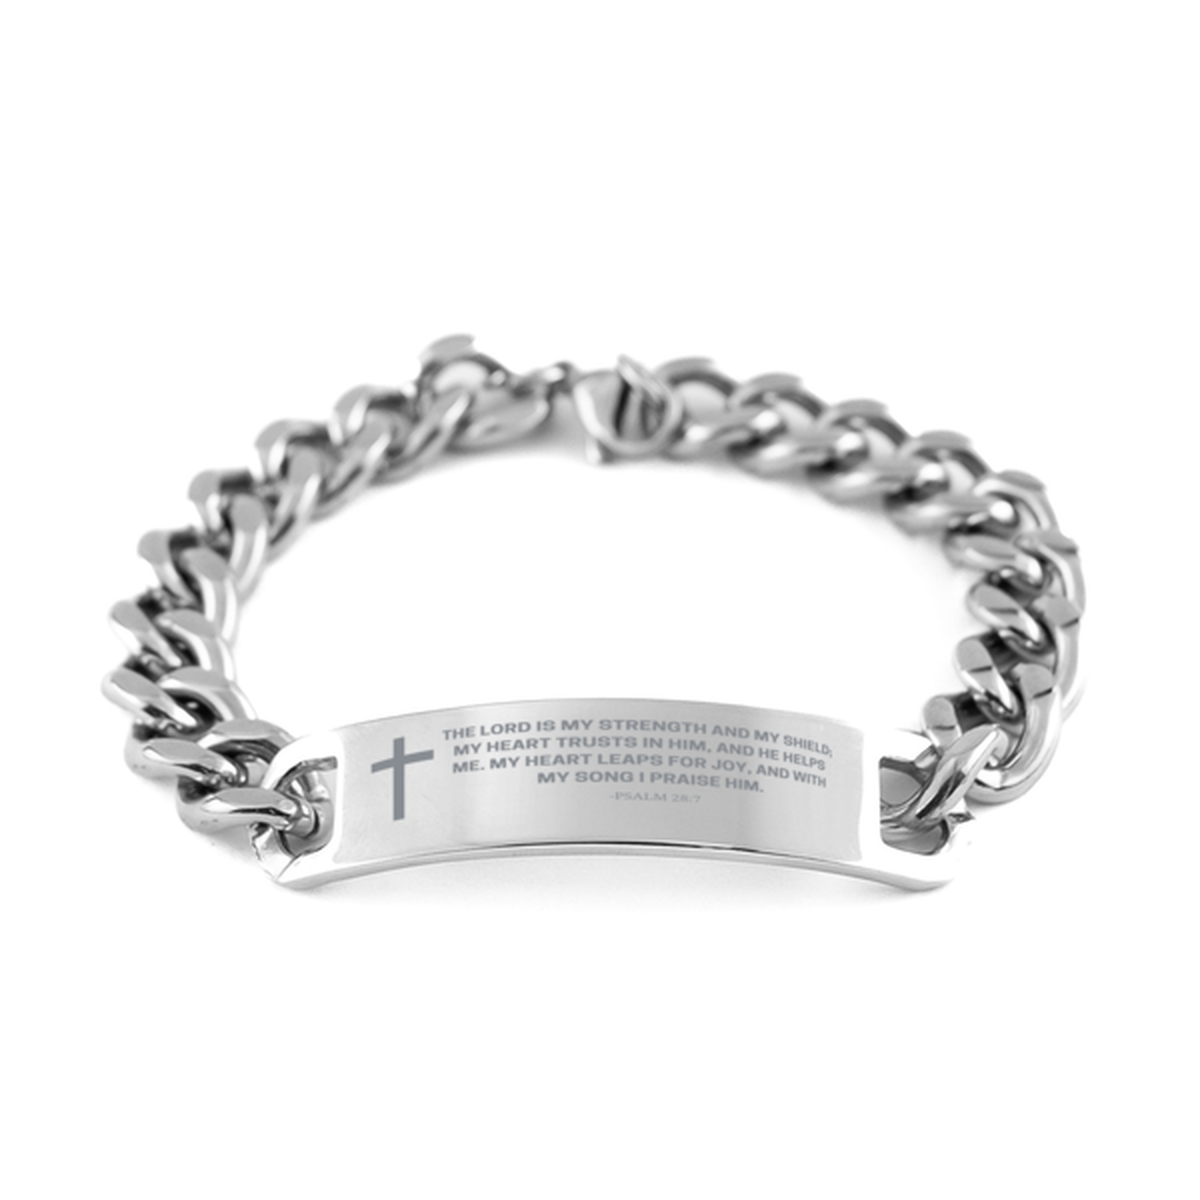 Baptism Gifts For Teenage Boys Girls, Christian Bible Verse Cuban Chain Bracelet, The Lord is my strength and my shield, Catholic Confirmation Gifts for Son, Godson, Grandson, Nephew